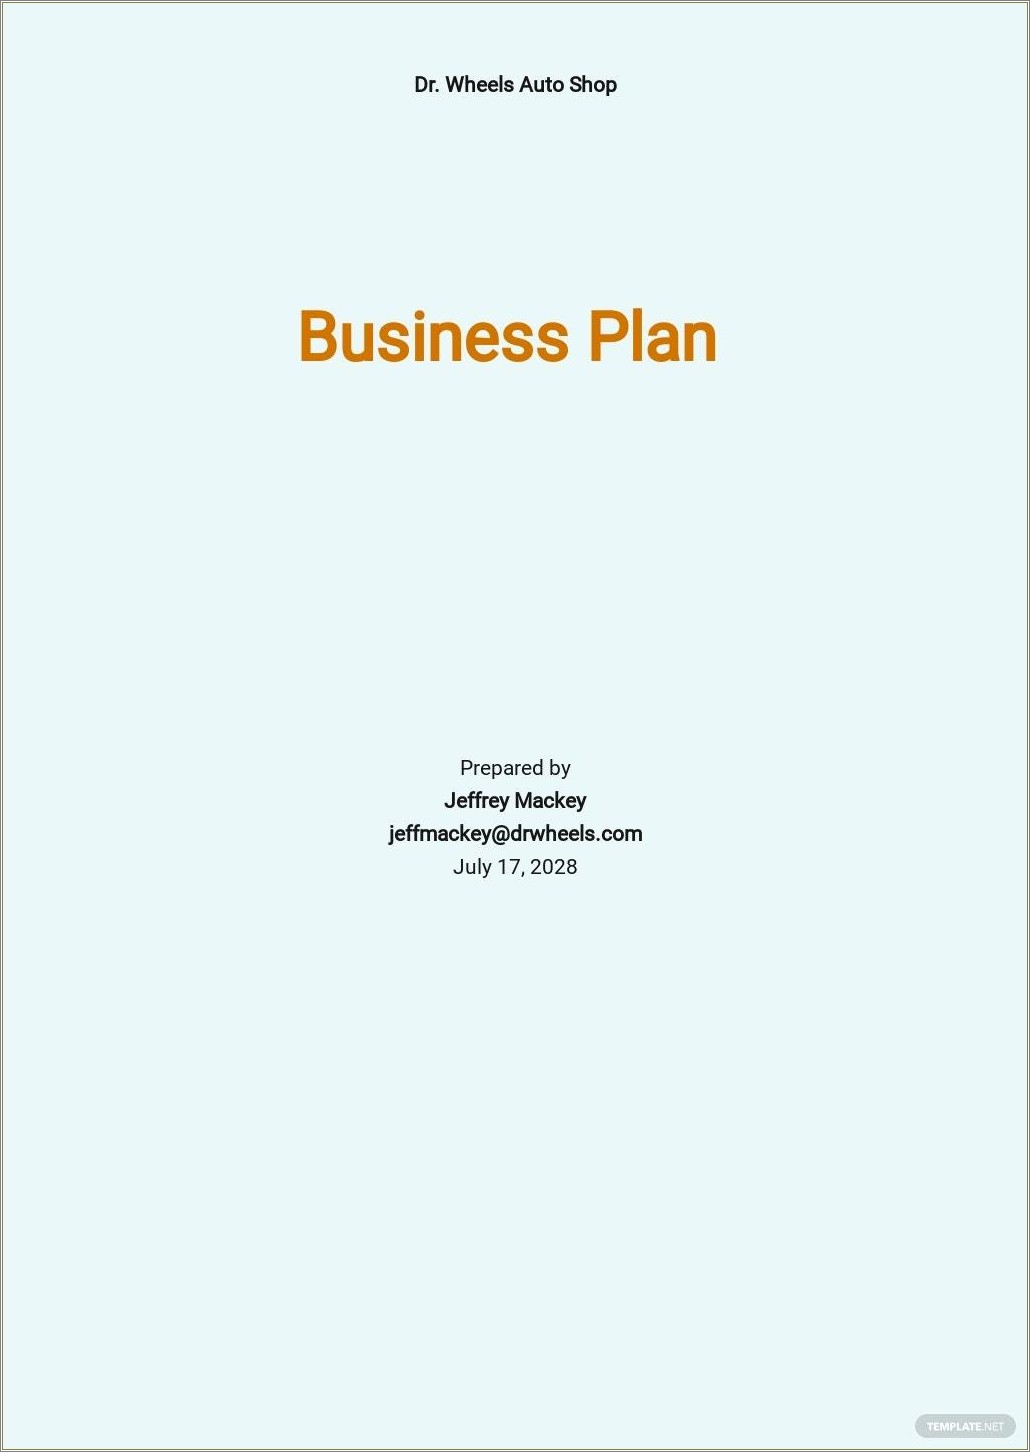 Free Business Plan Template For Auto Repair Shop